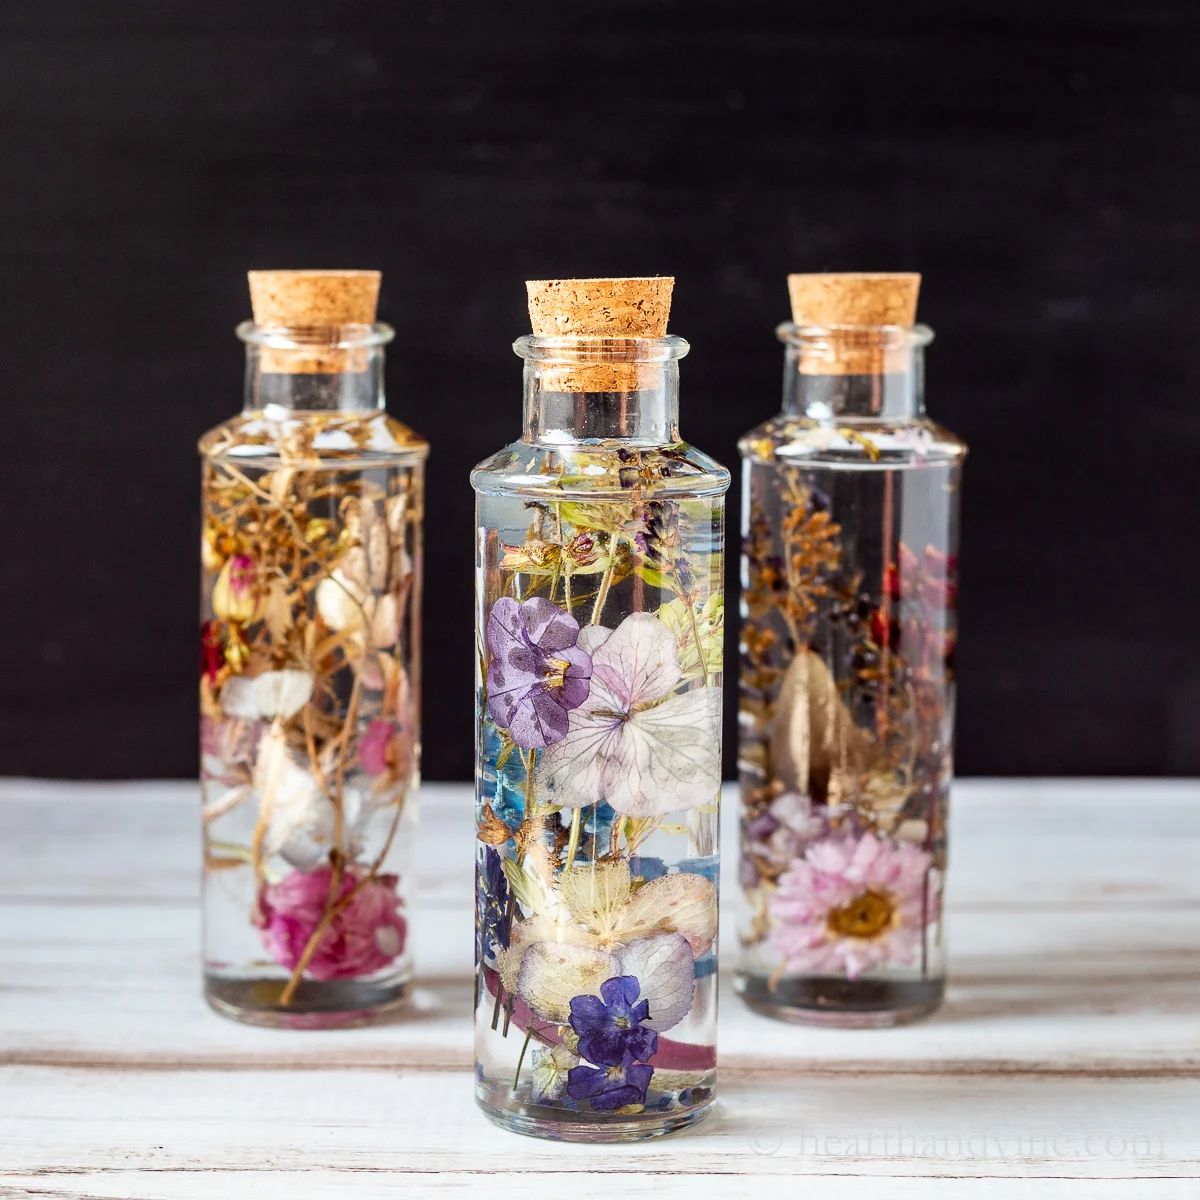 Books and decorative dried flowers in glass bottle Stock Photo by